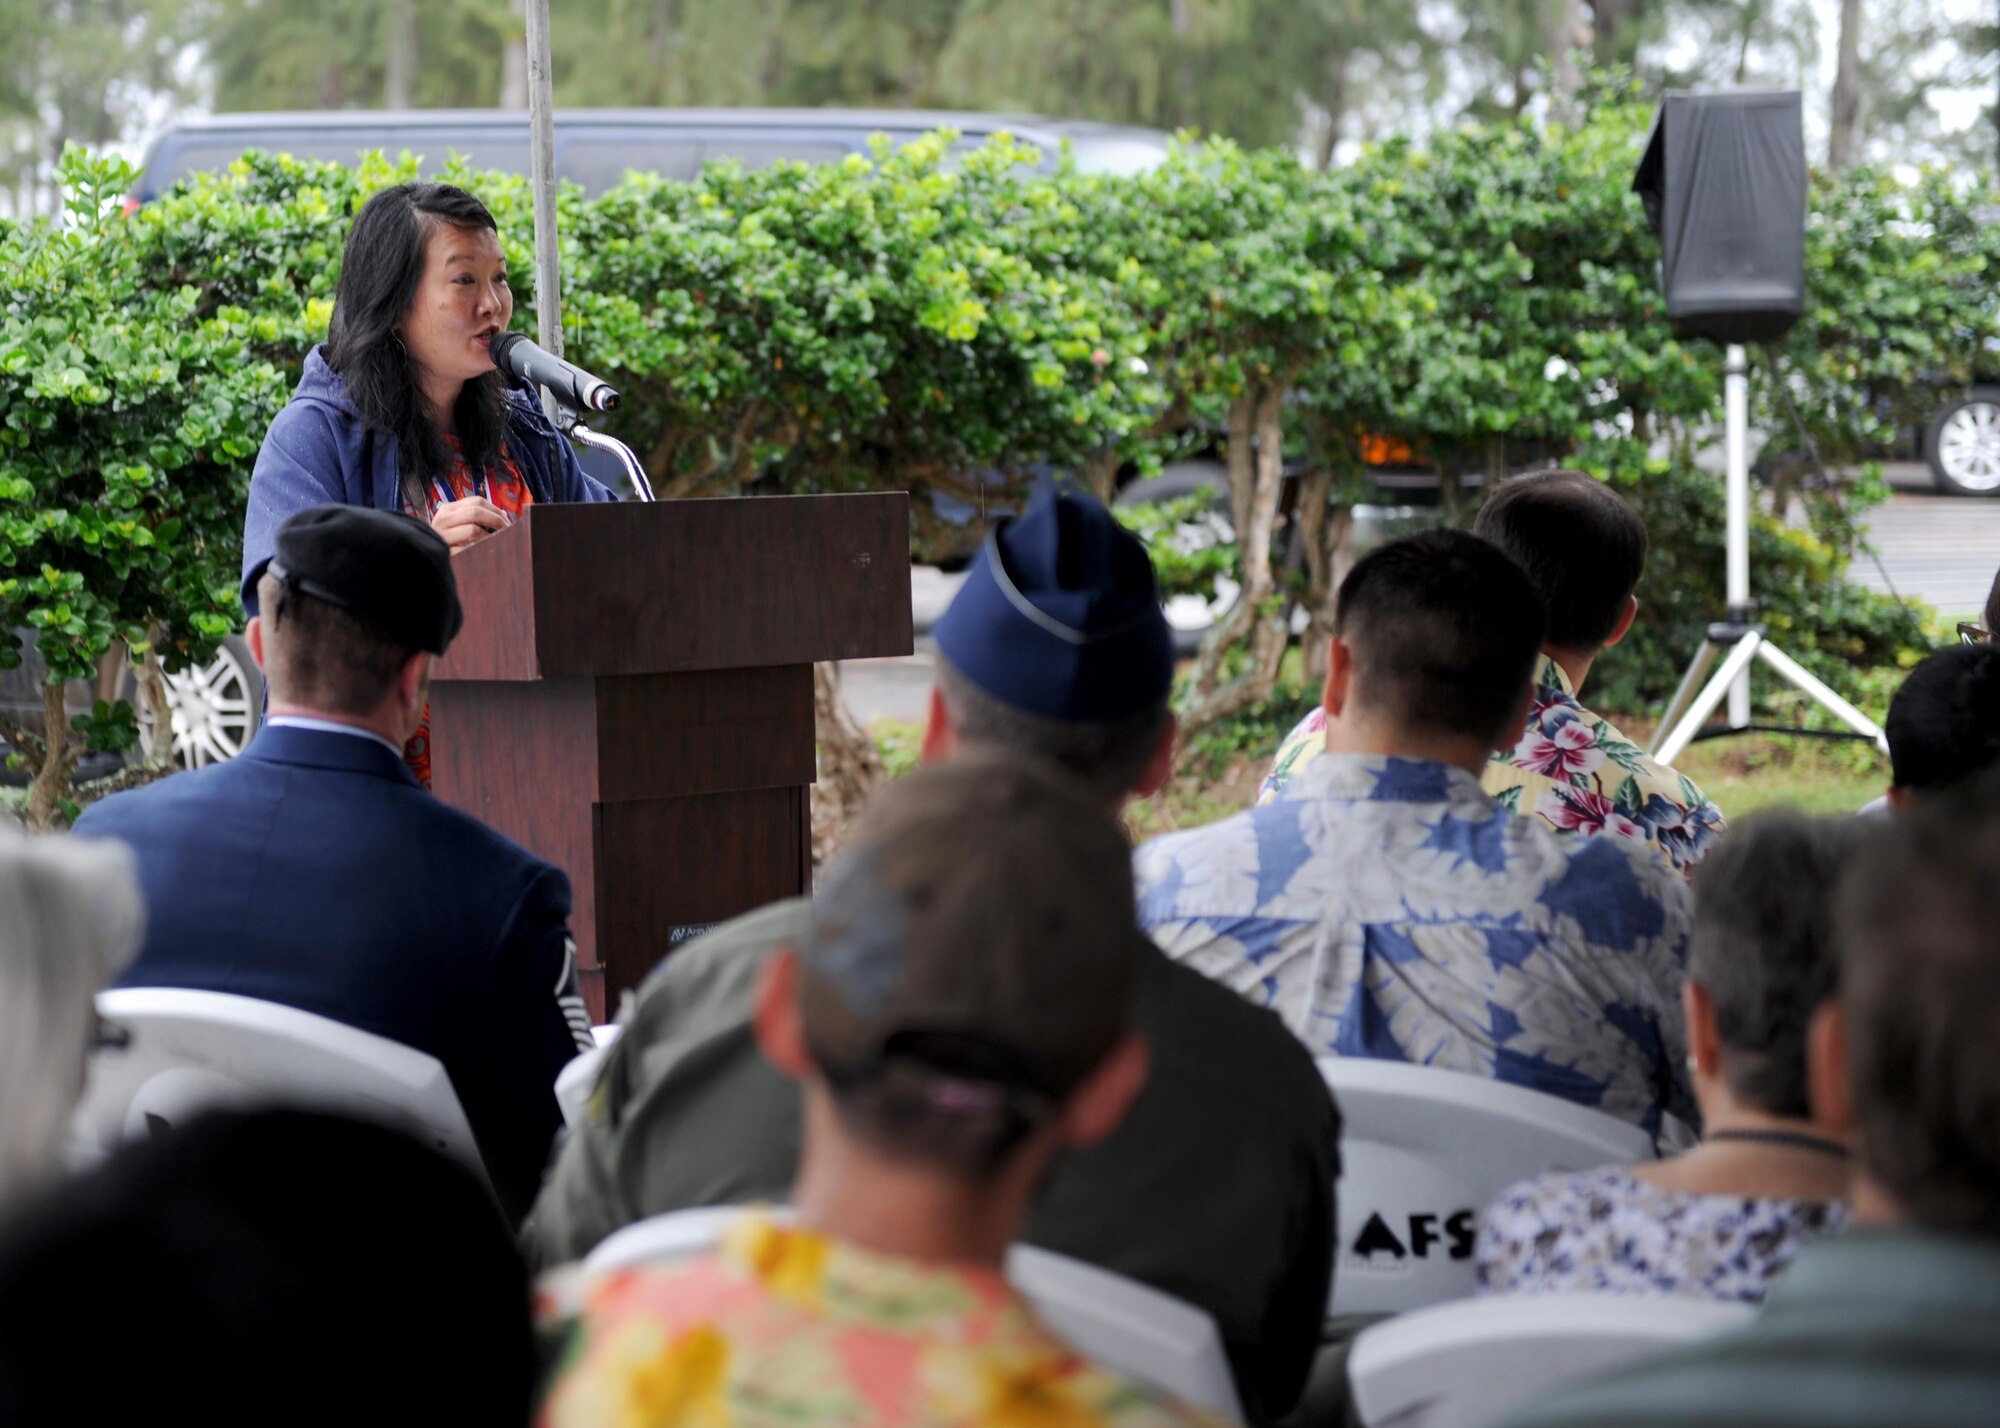 Jessie Higa, a volunteer historian and event organizer, gives keynote remarks during a ceremony commemorating servicemembers honored for their bravery during the Dec. 7th attack on Pearl Harbor and Oahu at Bellows Air Force Station, Hawaii, Dec. 8th, 2016. Approximately 100 people, including family members of several honored veterans, came together in recognizing the bravery displayed on the day of the attacks. (U.S. Air Force photo by Staff Sgt. Alexander Martinez)